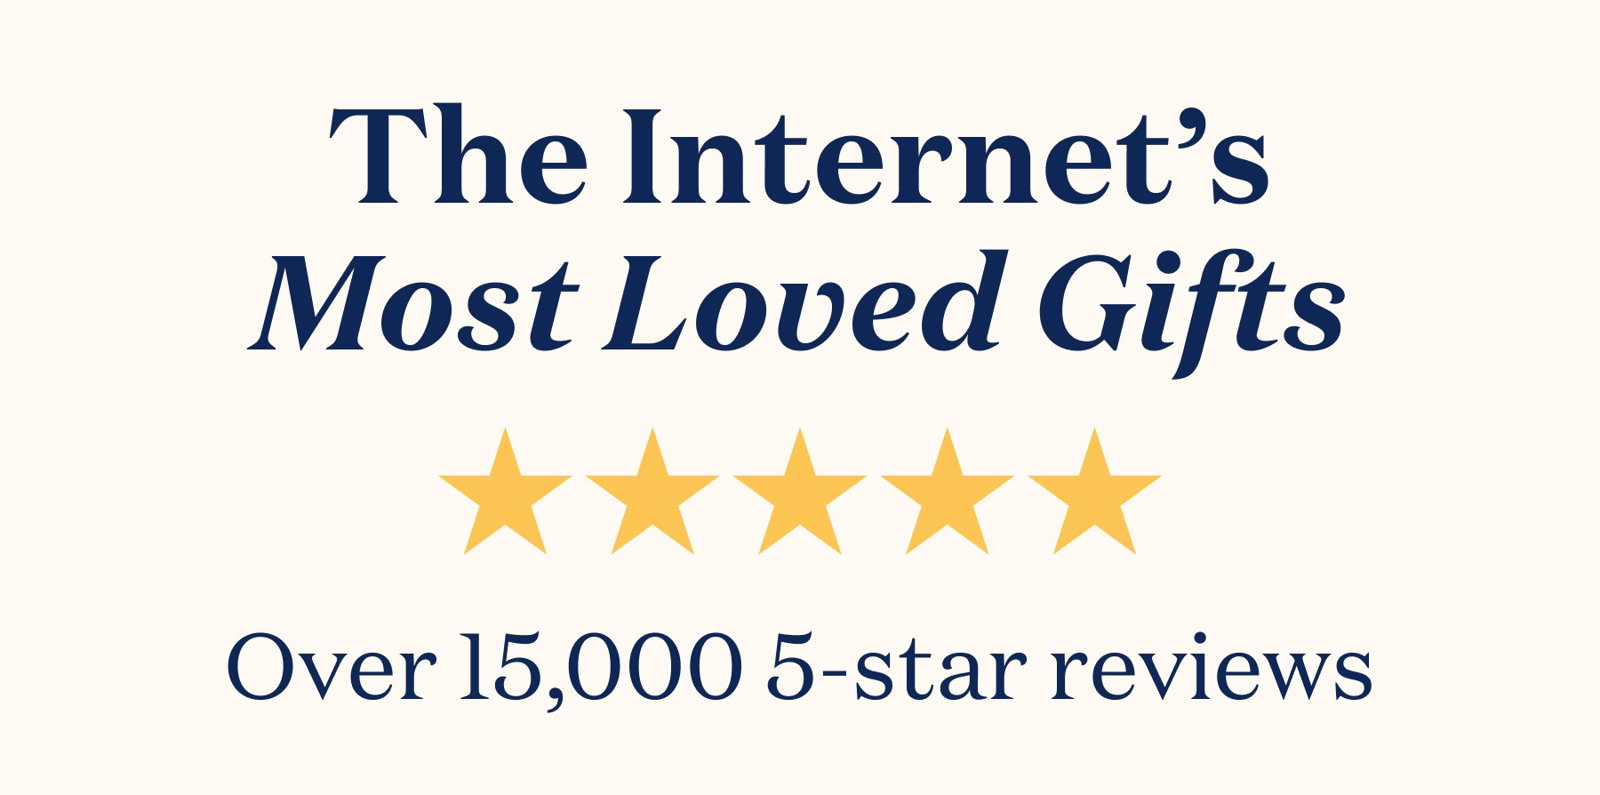 THE INternet's most loved gifts